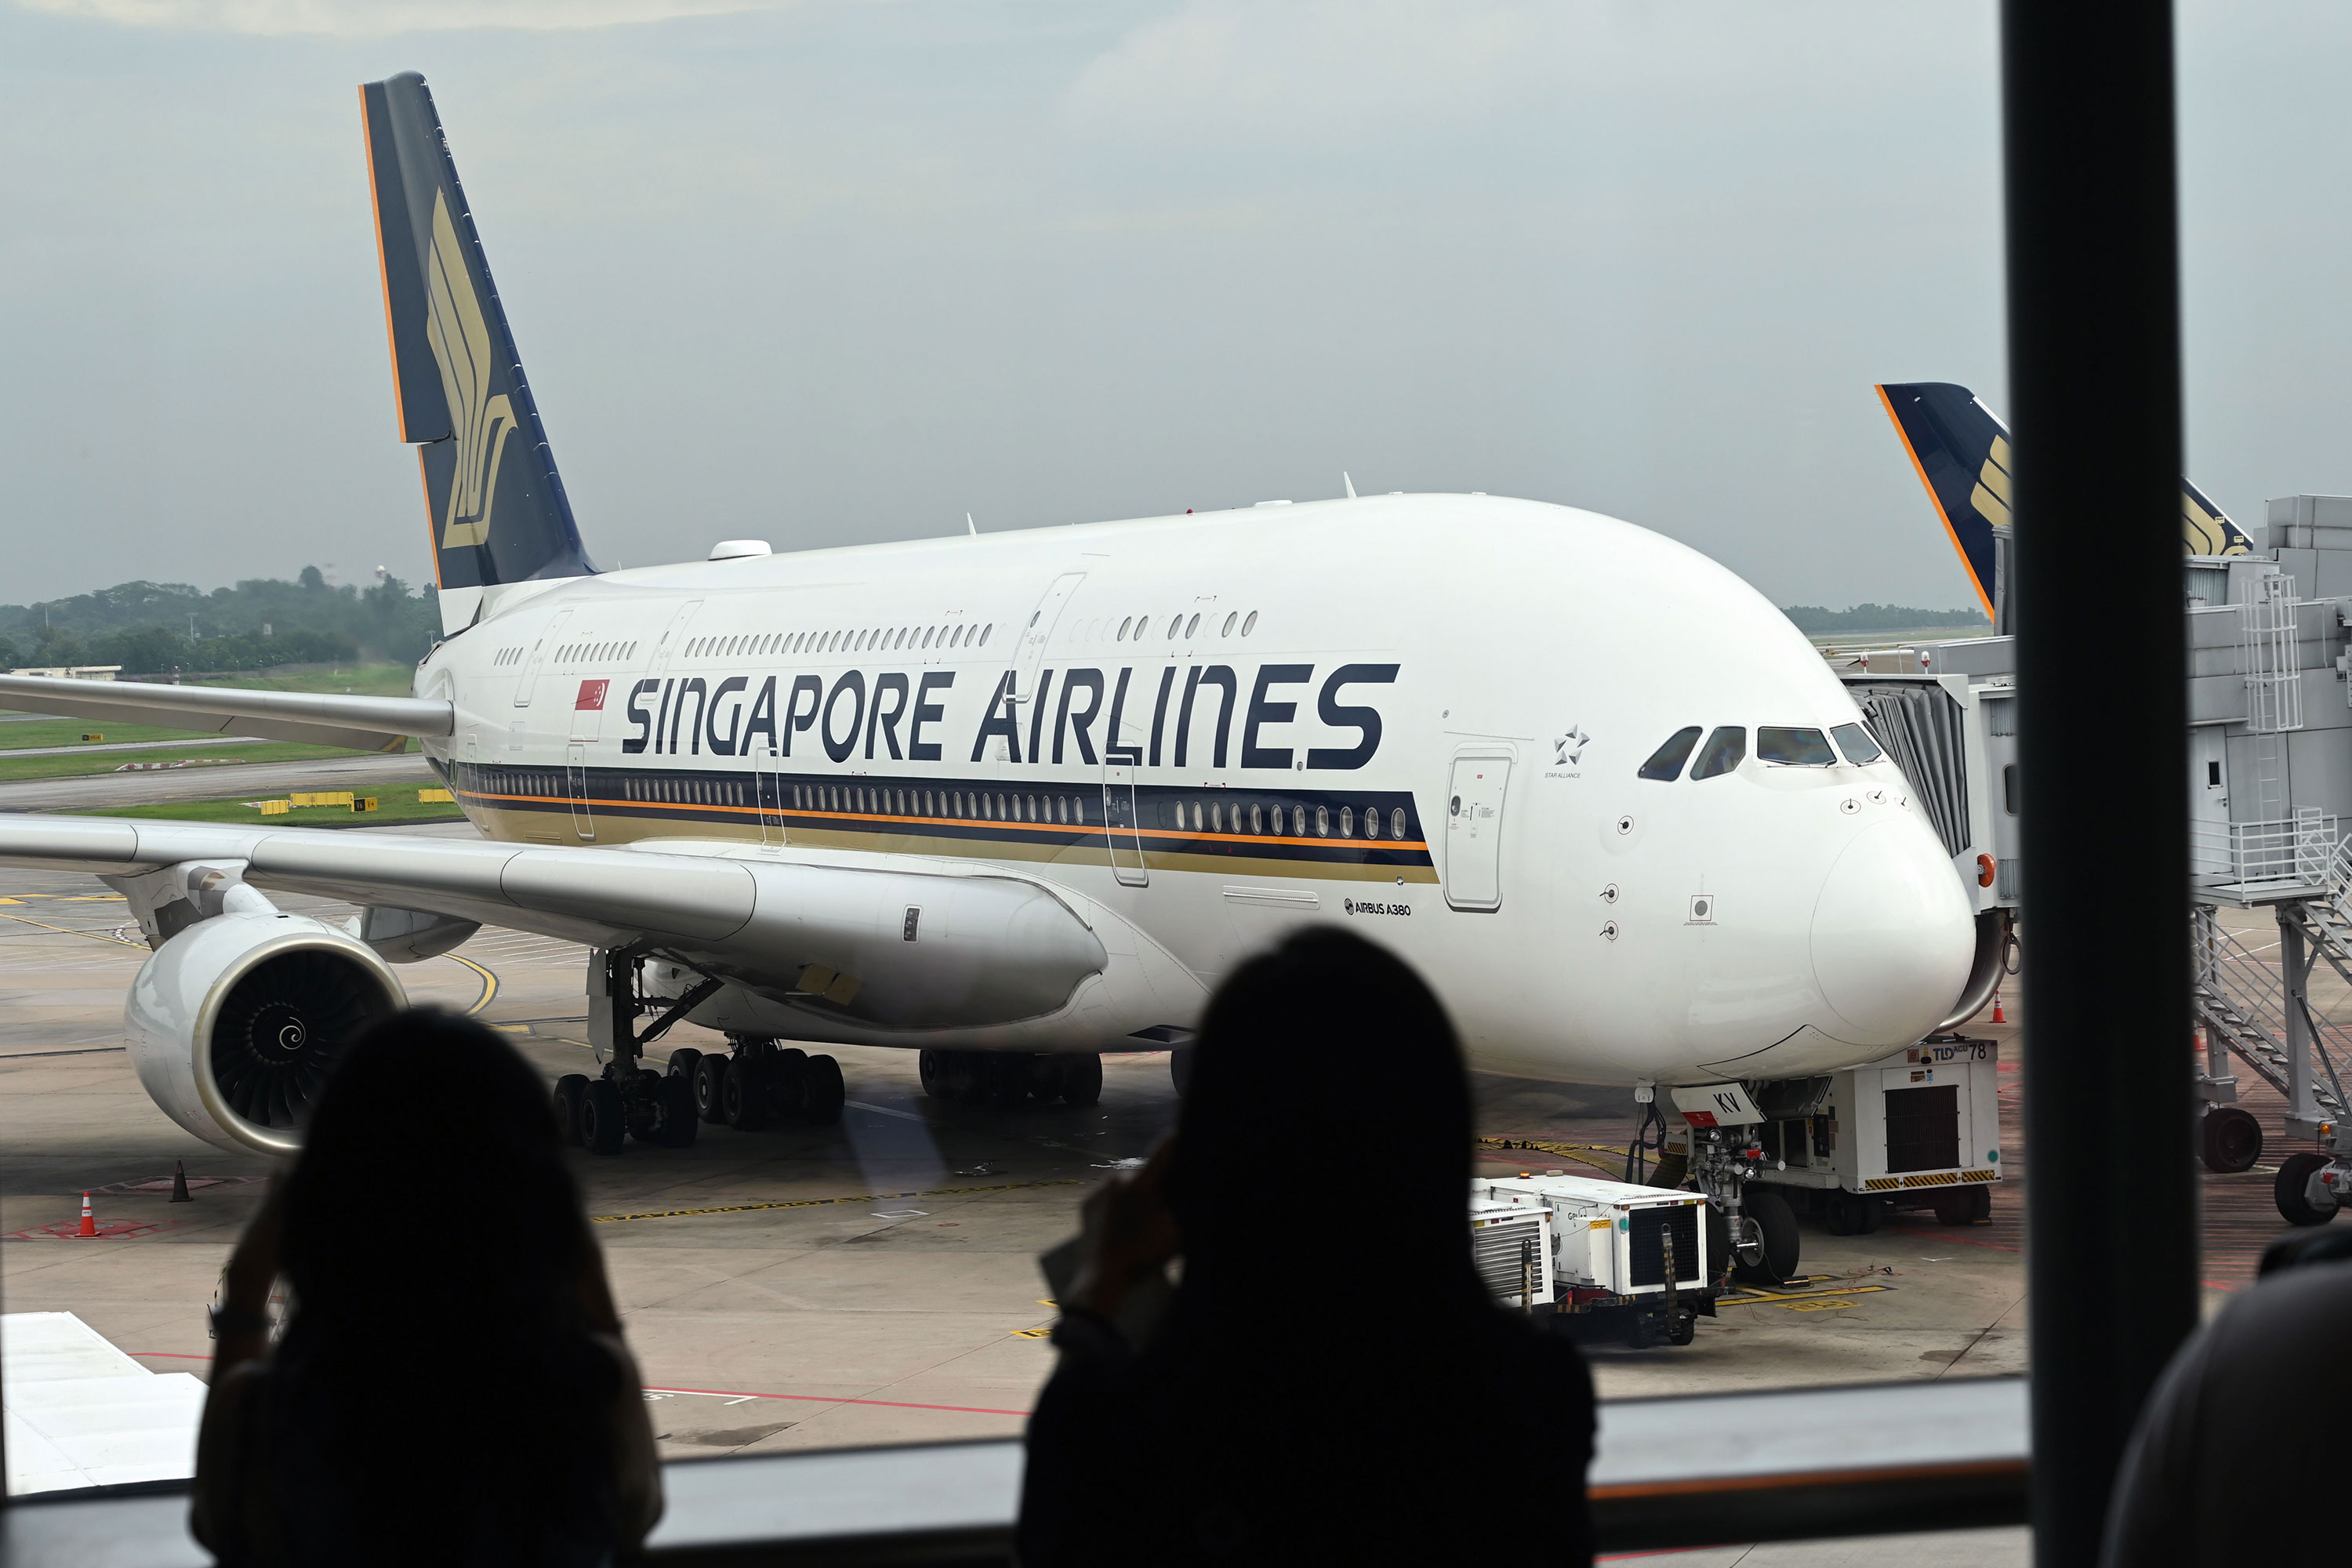 It's hard to imagine our skies without them now, but in 2007  Singapore Airlines carried out the first passenger flight of an Airbus A380. In doing so they re-wrote aviation history. The A380 is the largest passenger airliner in the world with room for 850 passengers.